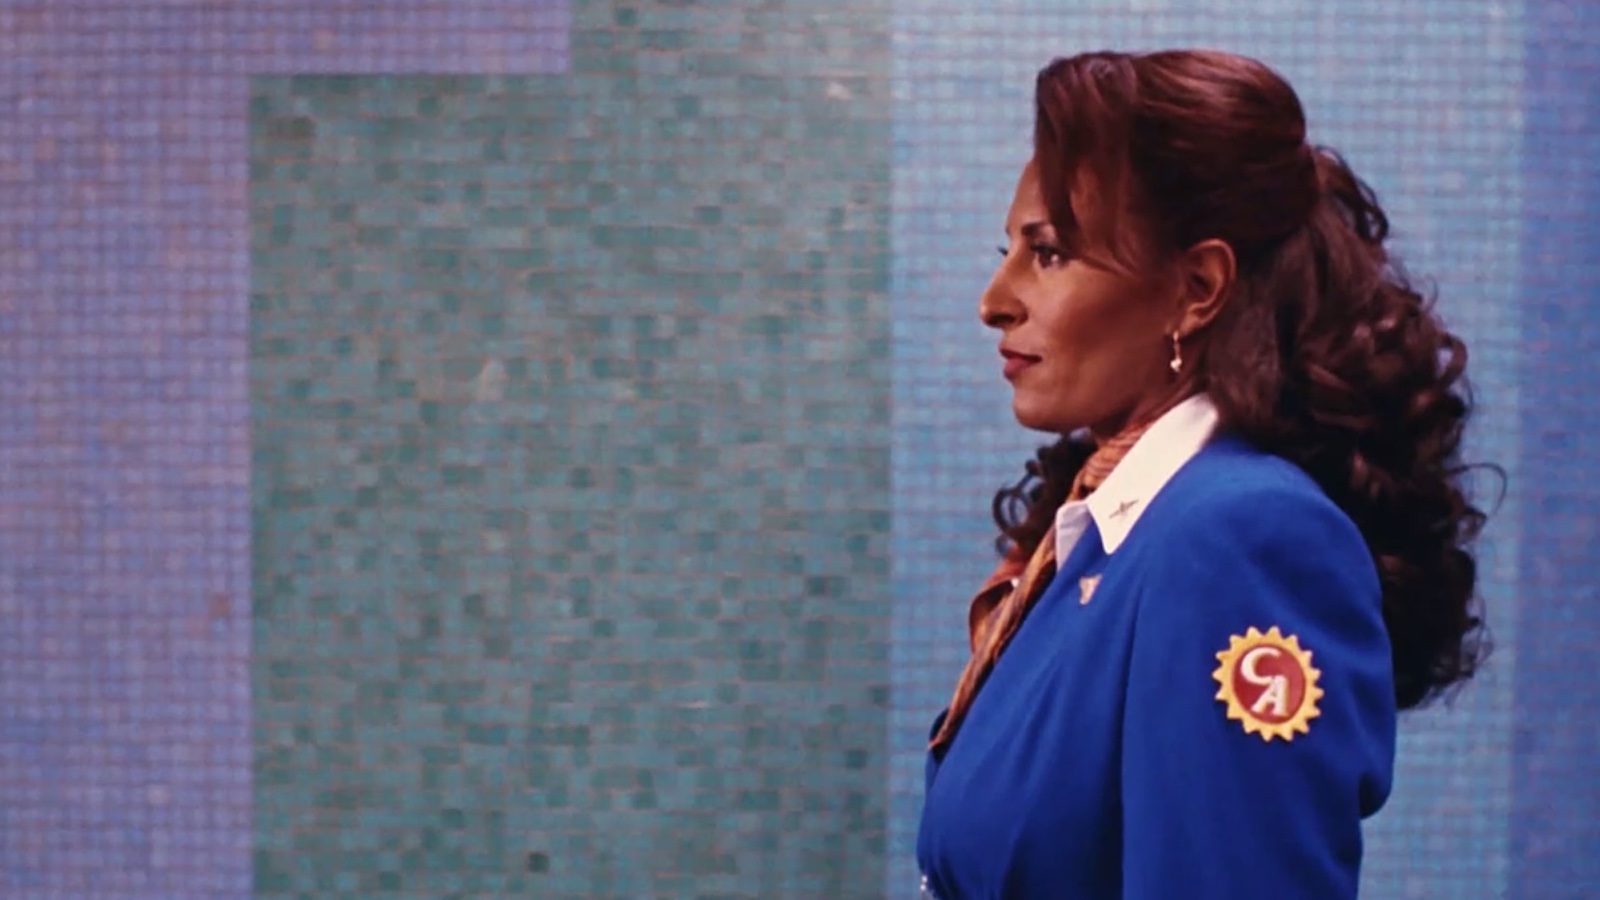 A woman in an airline attendant blue suit in profile against a colorful tiled wall at an airport